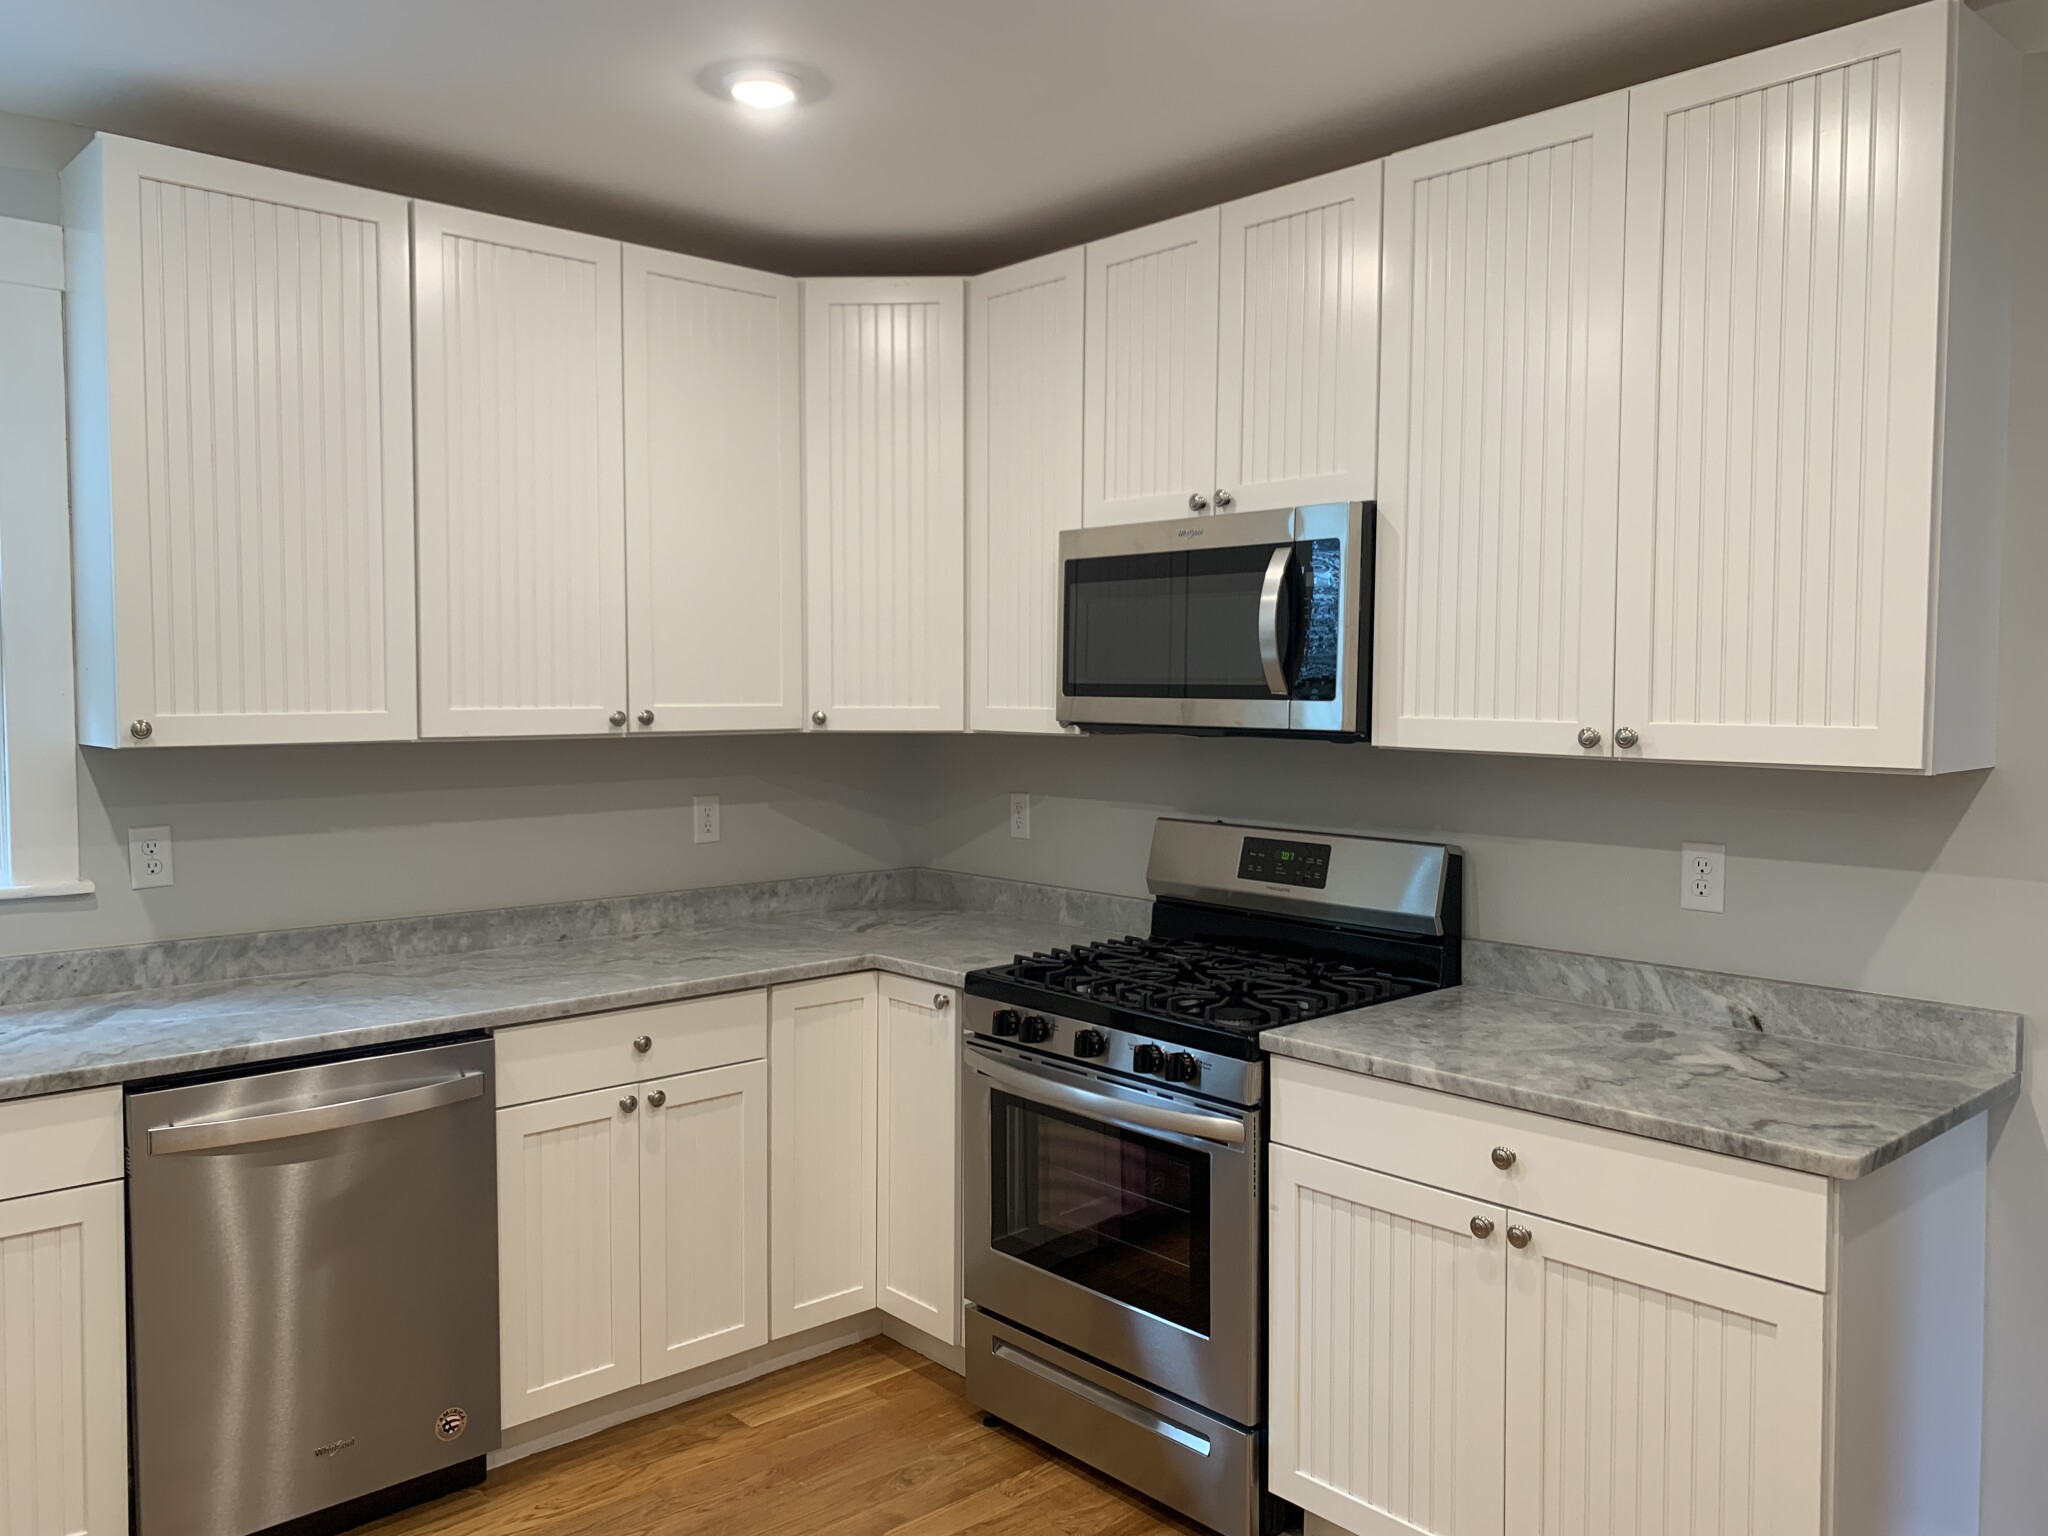 Photos of apartment on Cherry,Somerville MA 02144